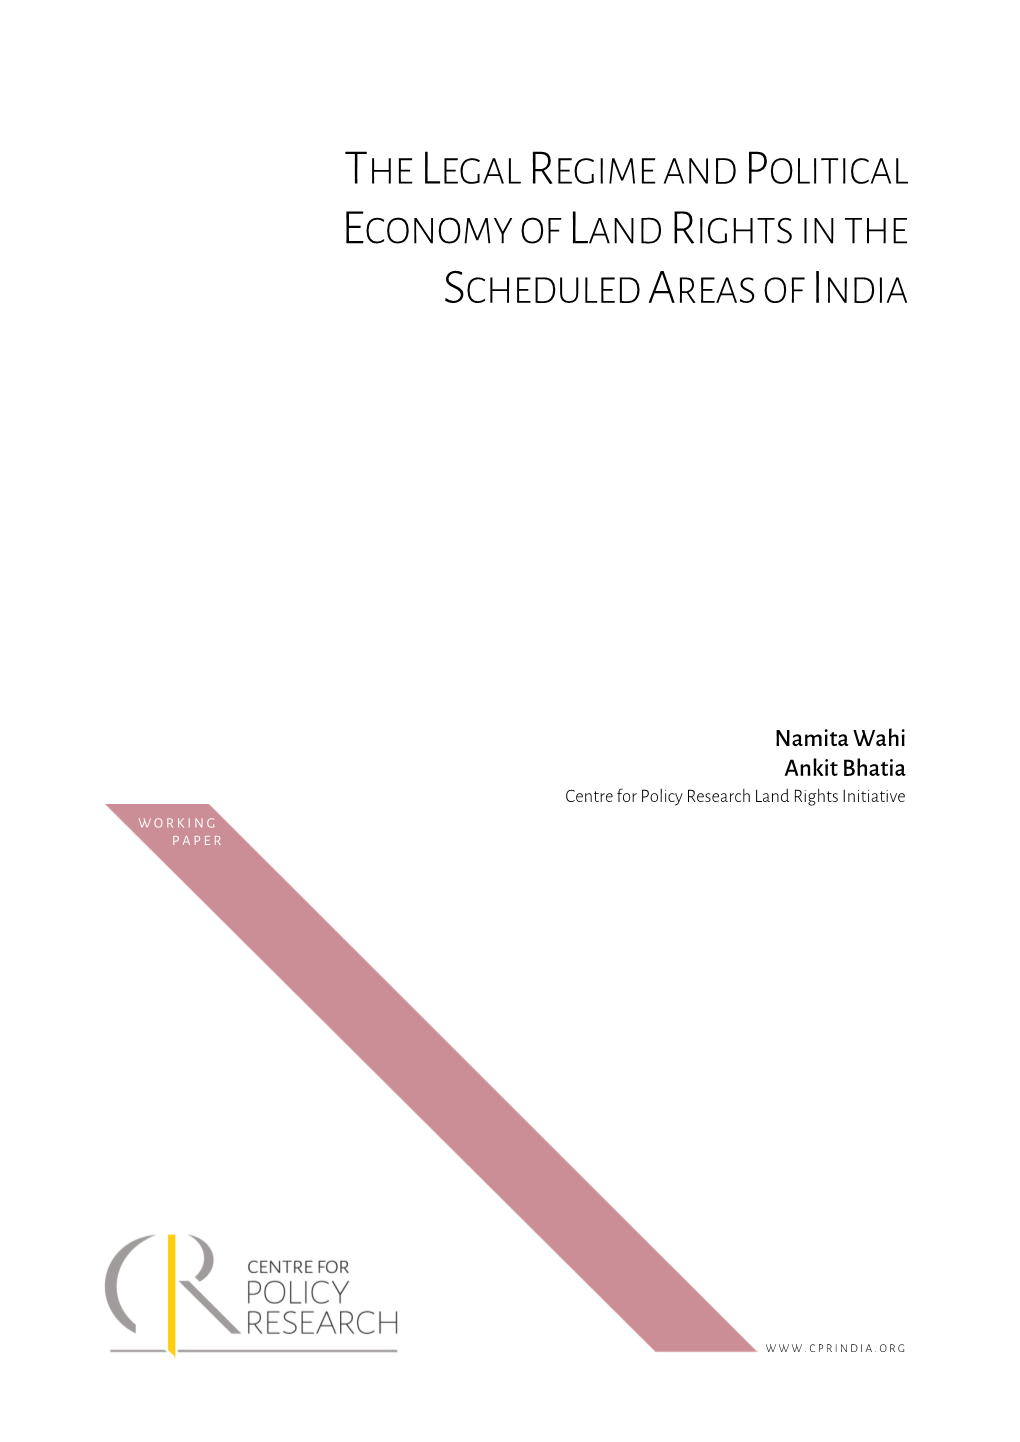 The Legal Regime and Political Economy of Land Rights in the Scheduled Areas of India